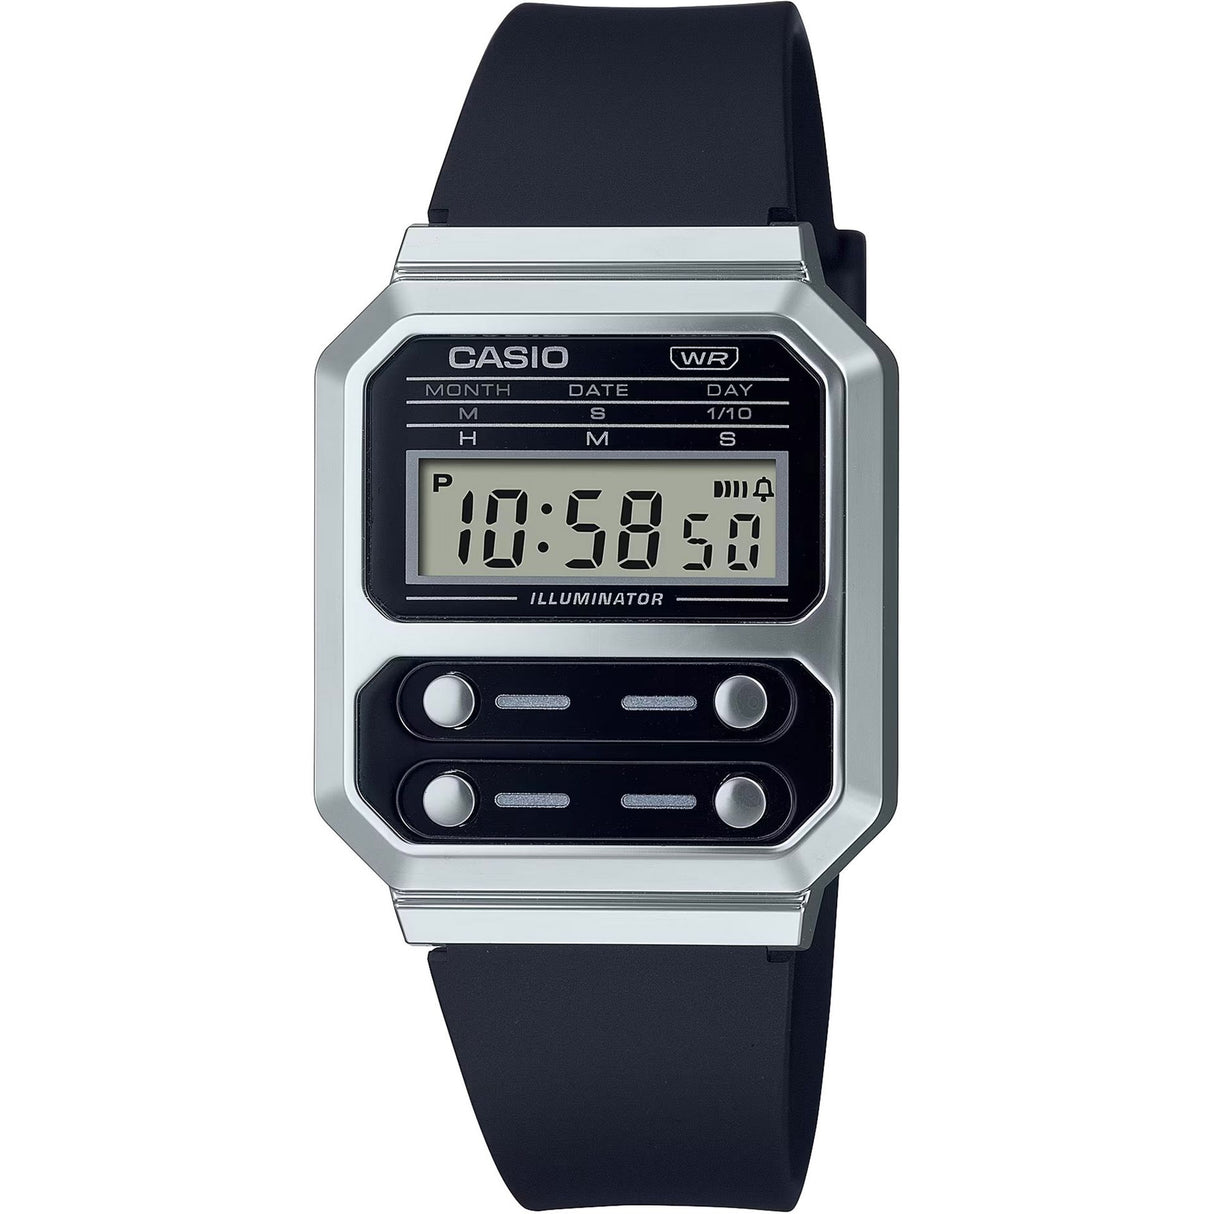 Casio Unisex Classic Digital Watch Clear Digital Display with Casio Logo 33mm Case Size (Comfortable for Most Wrists) Lightweight Plastic Case Stainless Steel Strap Quartz Movement Easy to Read Display Additional Features (Optional: List features like Alarm, Stopwatch) 10 ATM Water Resistant Durable & Reliable Unisex Style